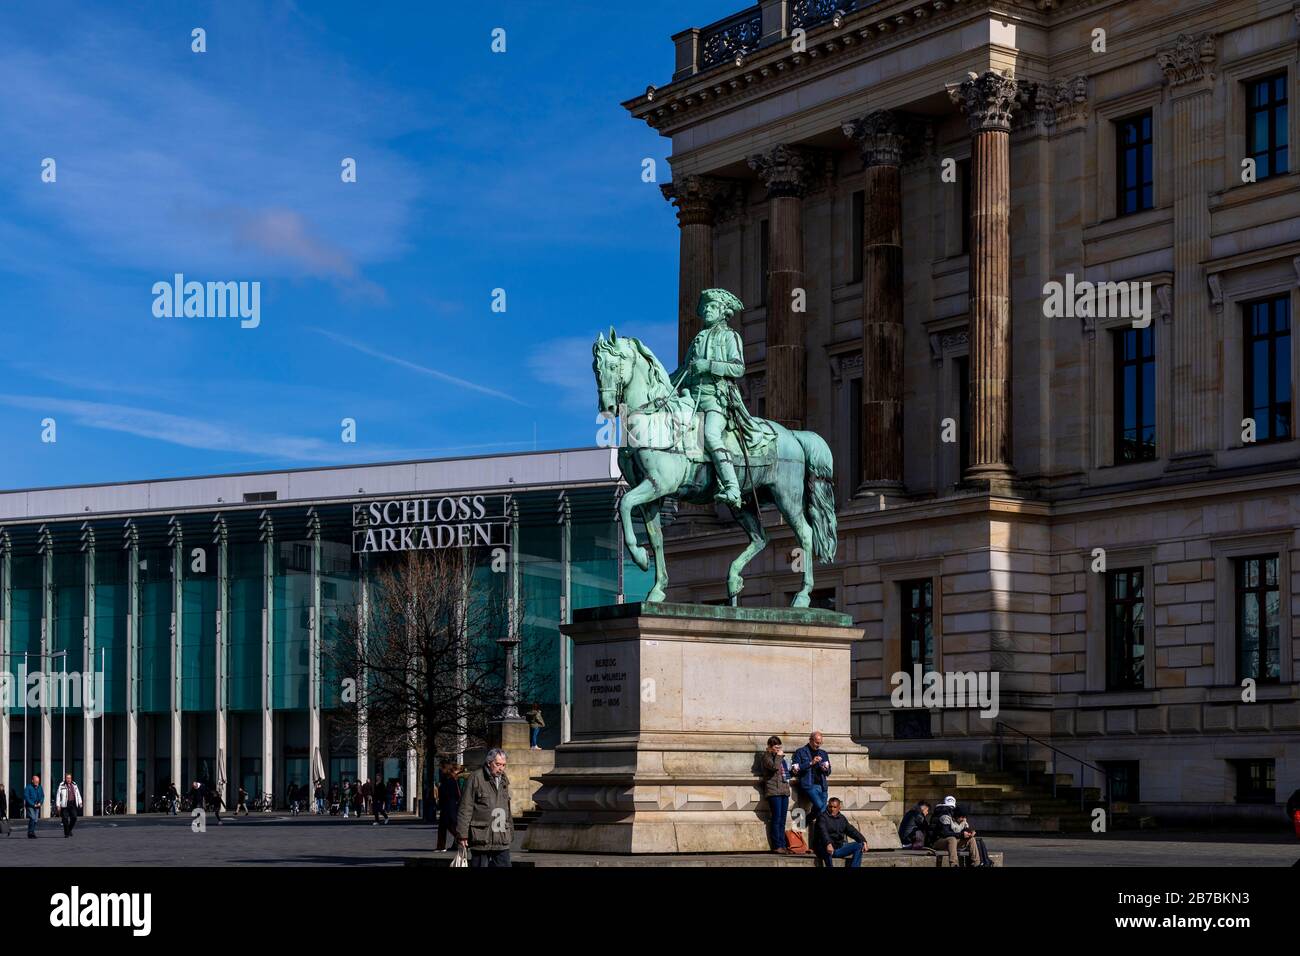 People enjoying sunny spring day in Braunschweig. Schloss-Arkaden shopping mall provides with surrounding and fear of corona virus is not visible. Stock Photo